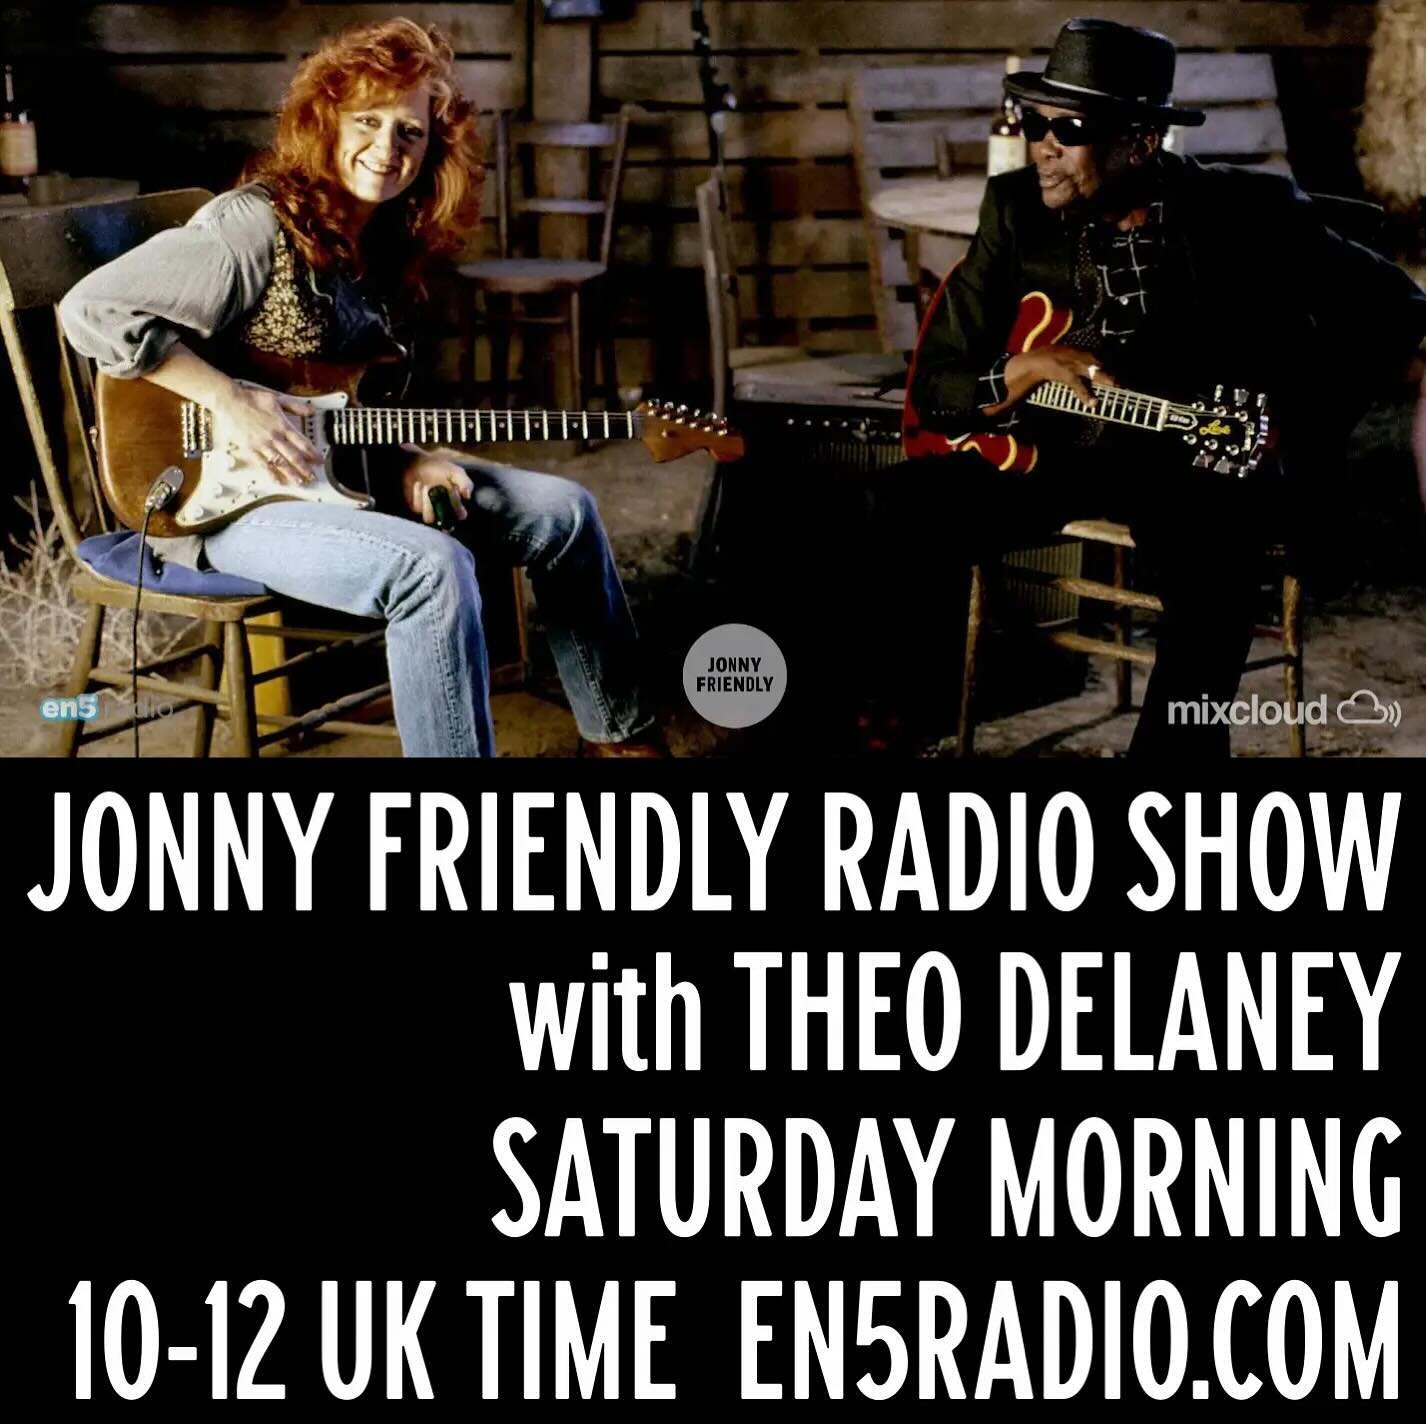 🎶 &lsquo;&hellip; Oh, but this whole country is full of lies
You&rsquo;re all gonna die and die like flies&hellip;&rsquo;🎶

🕰Saturday morning 10-12
📻EN5radio.com 

Search EN5radio.com on radio apps like TuneIn. Sonos etc.

🕺🏻
#americana #reggae